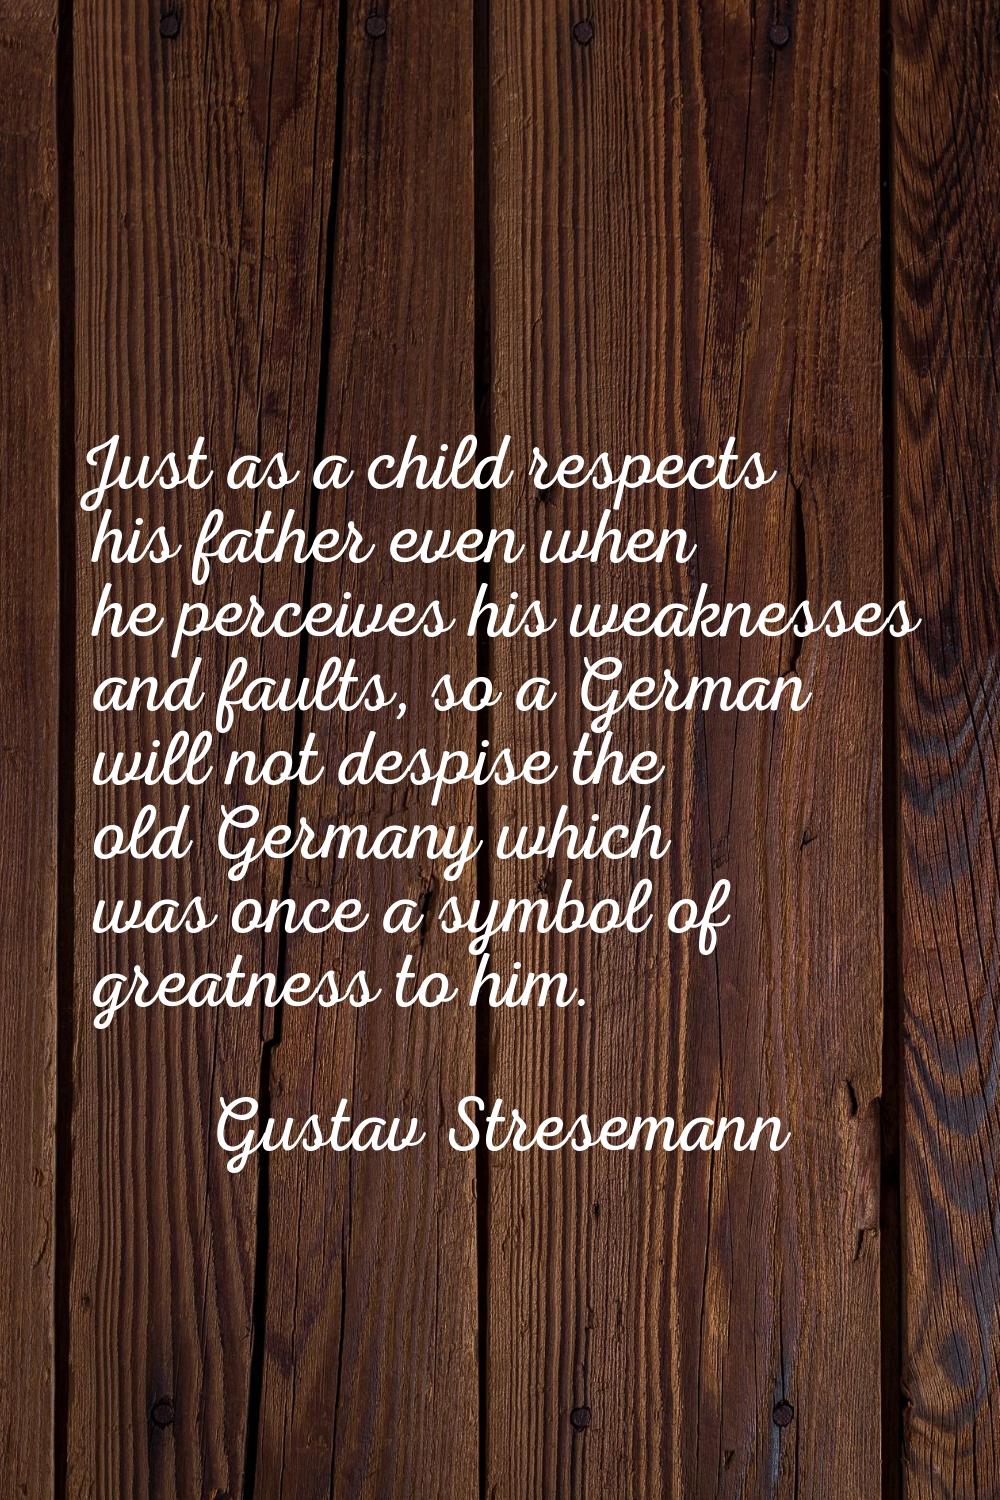 Just as a child respects his father even when he perceives his weaknesses and faults, so a German w